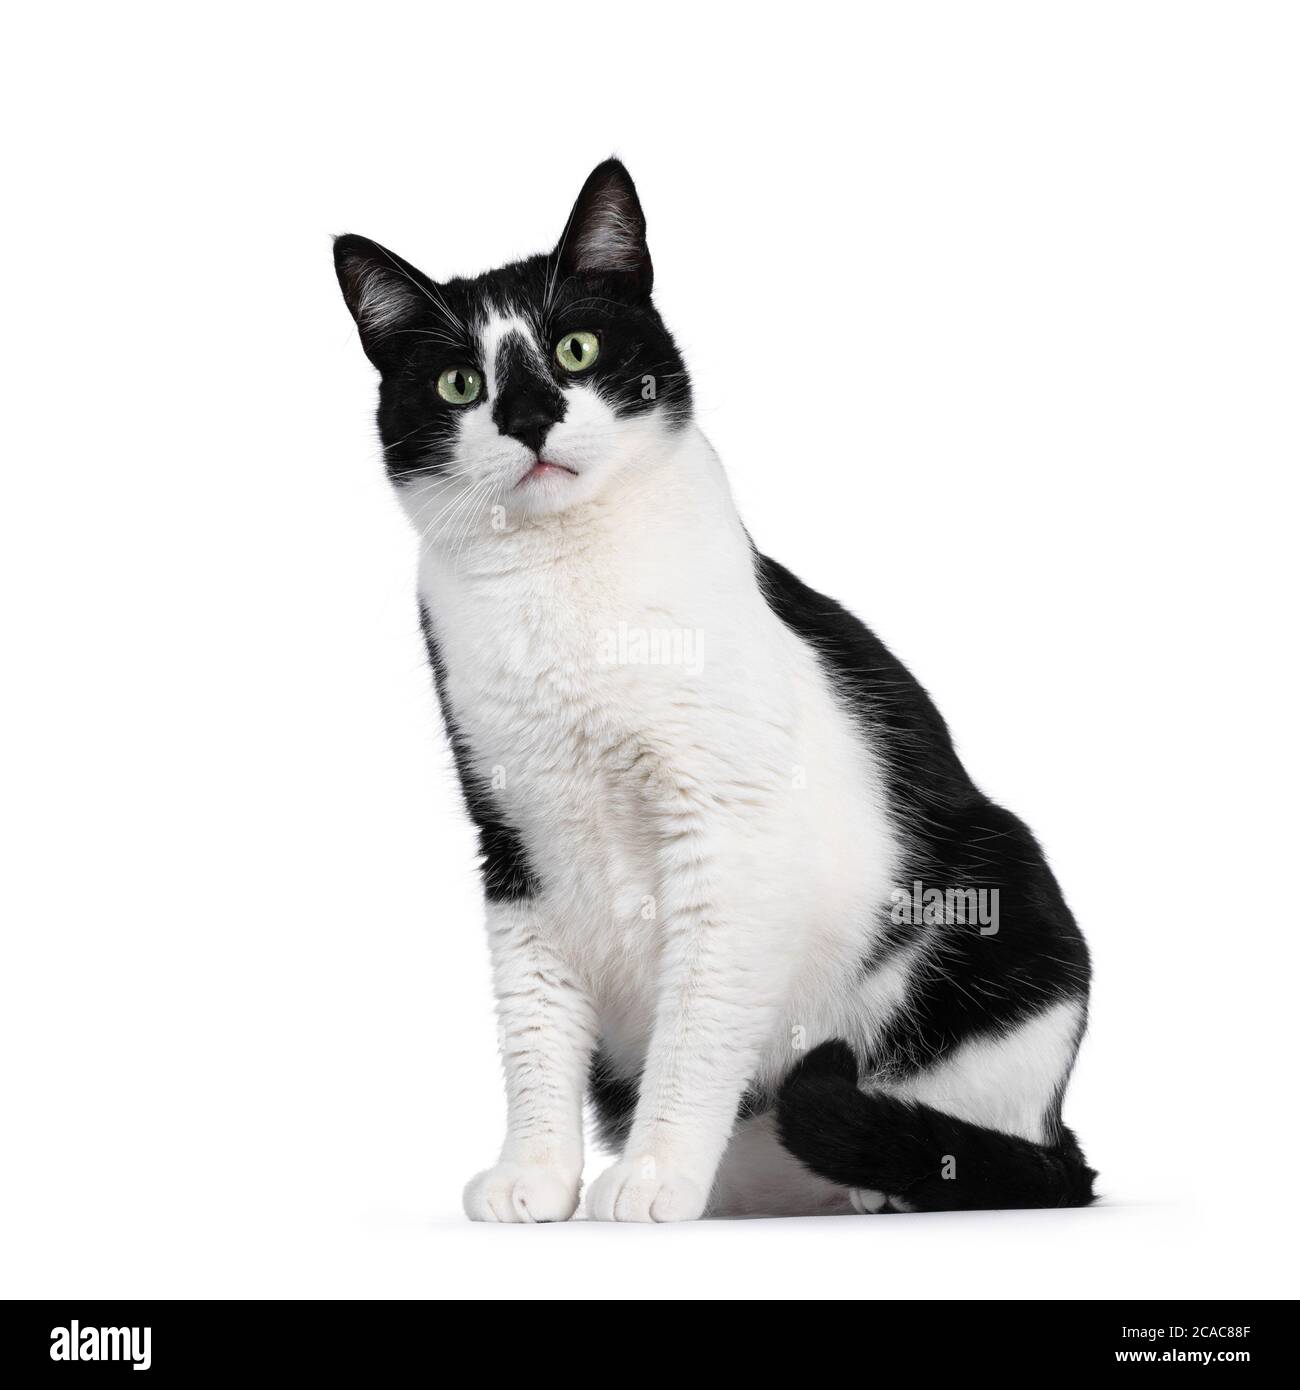 Cute black and white house cat, sitting side ways. Looking at camera with mesmerizing green eyes. Isolated on white background. Stock Photo